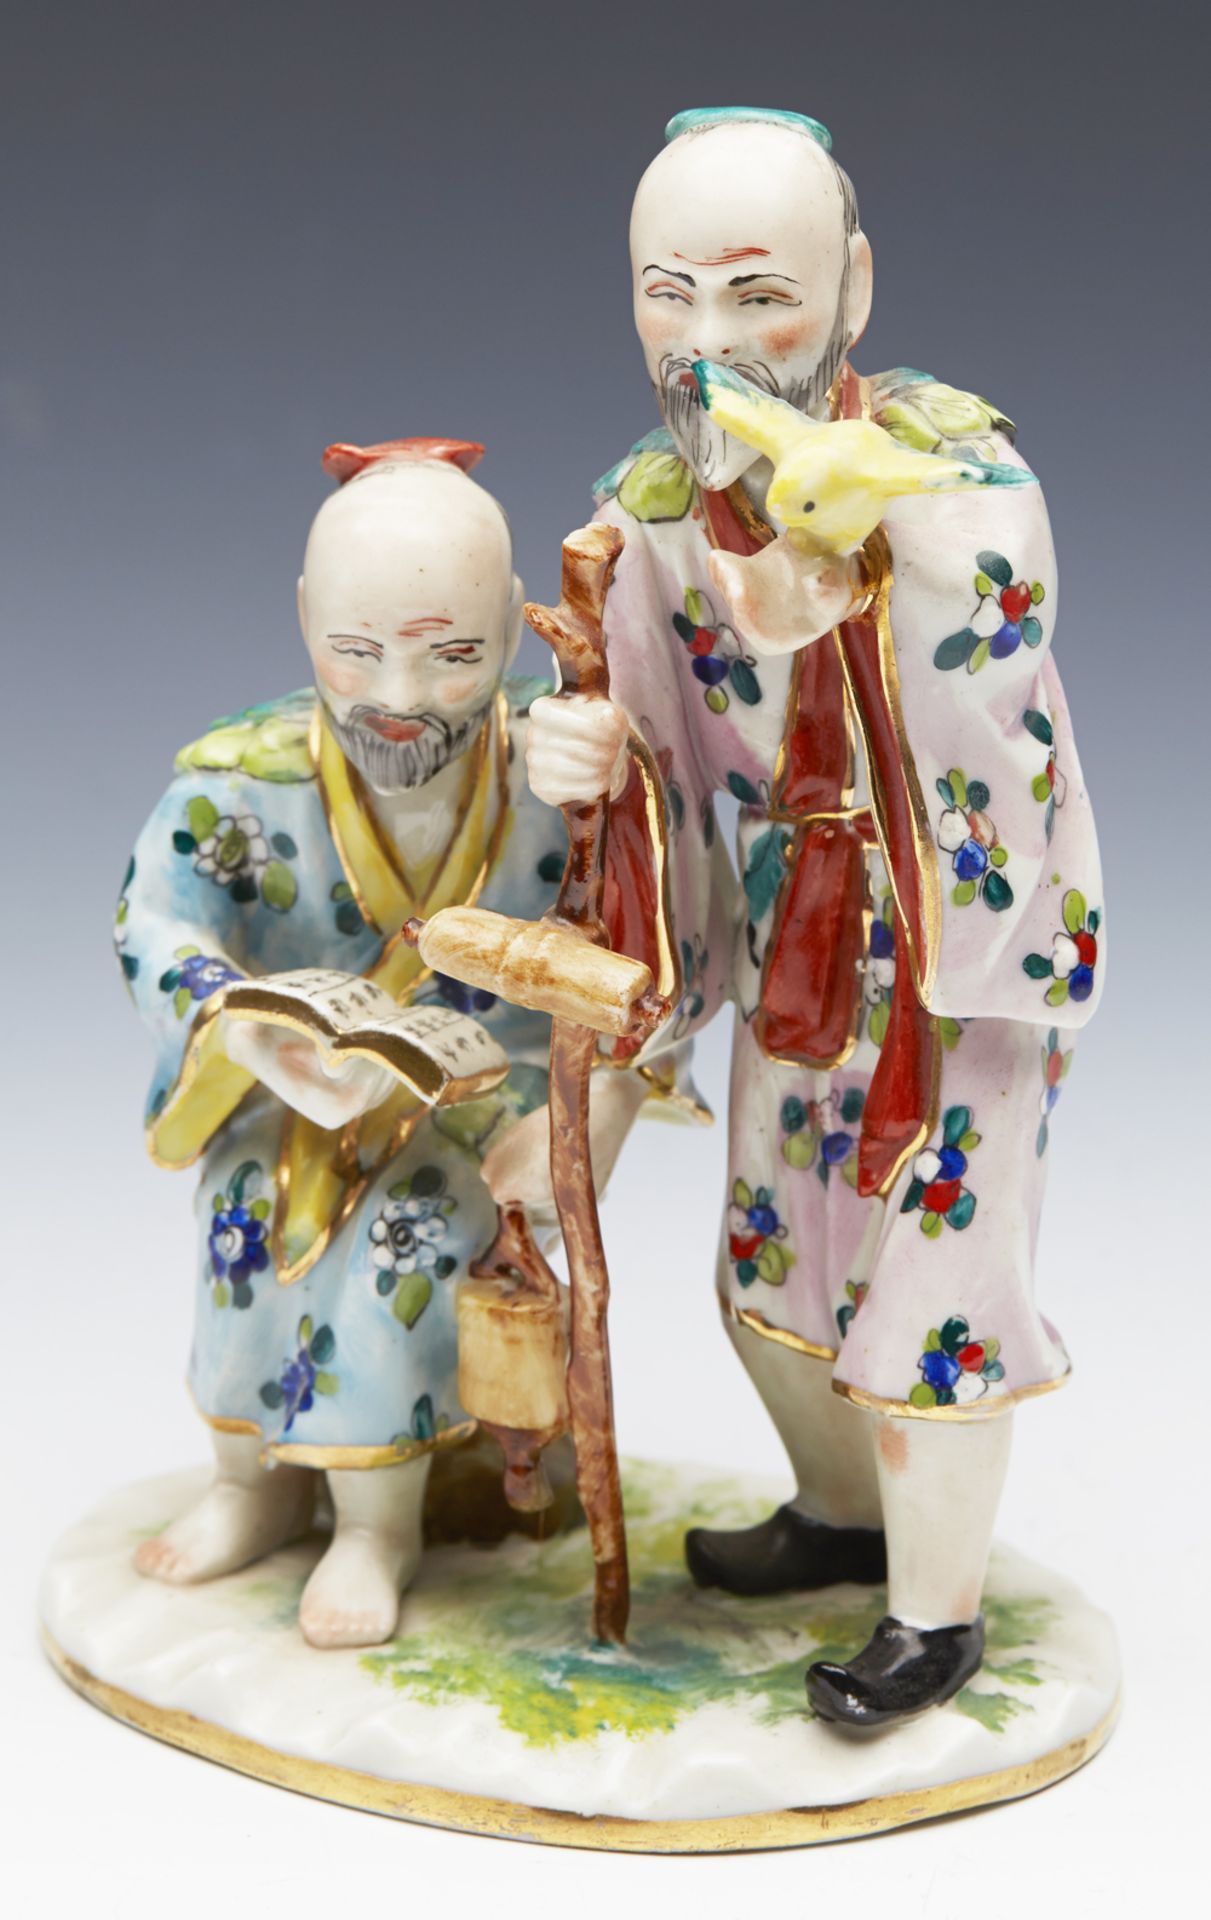 ANTIQUE CONTINENTAL PORCELAIN FIGURE OF TWO CHINESE ELDERS 19TH C.